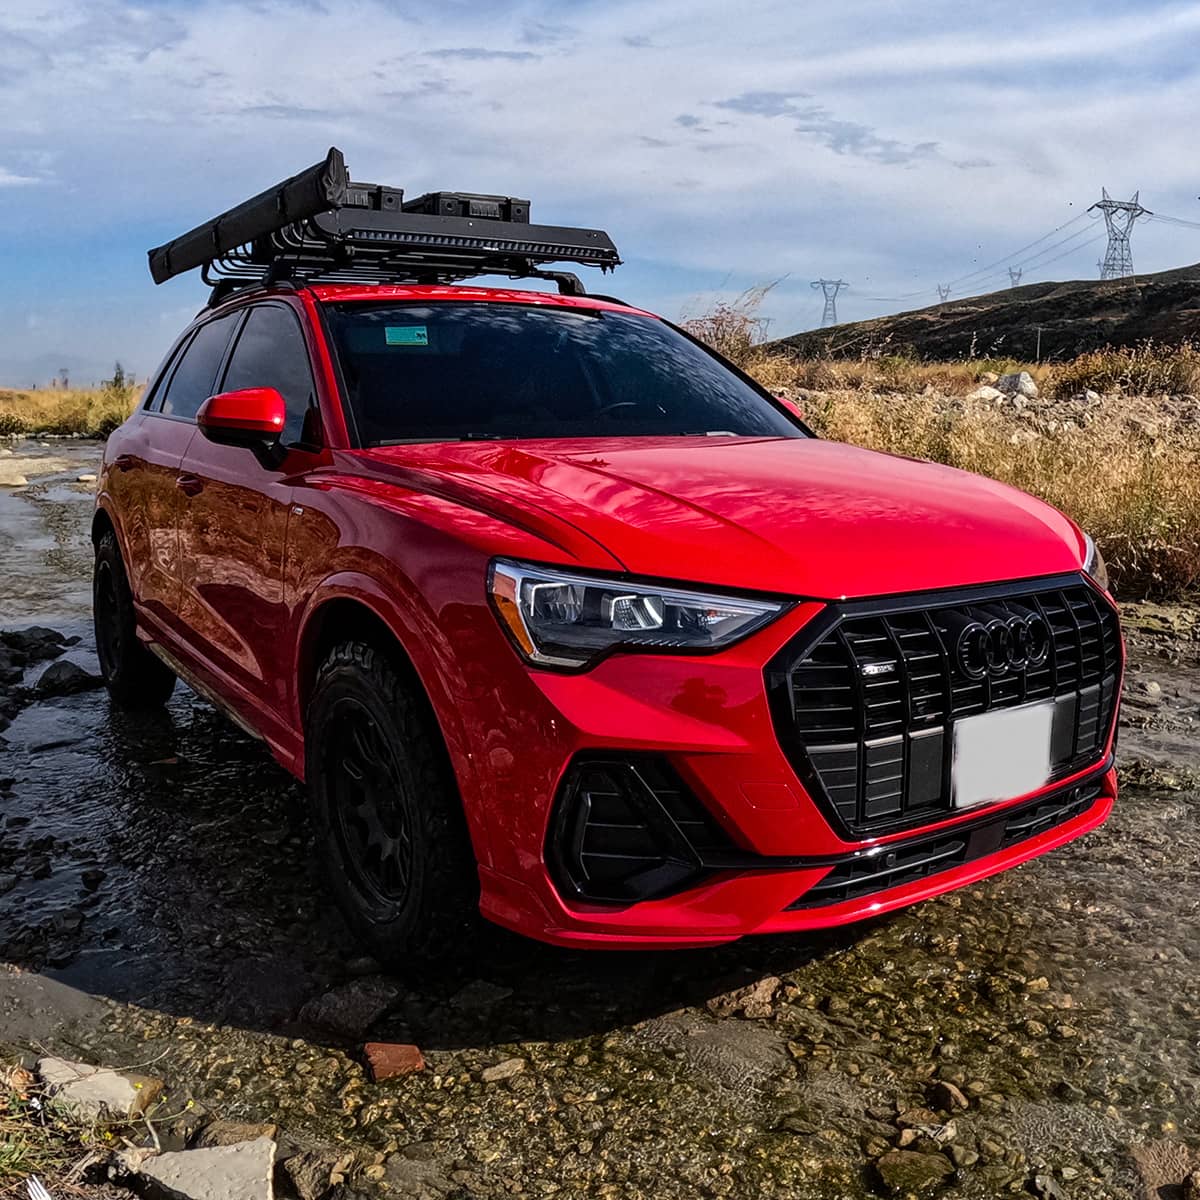 2022 Audi Q3 S-line overland build with Cargo basket roof rack and side awning